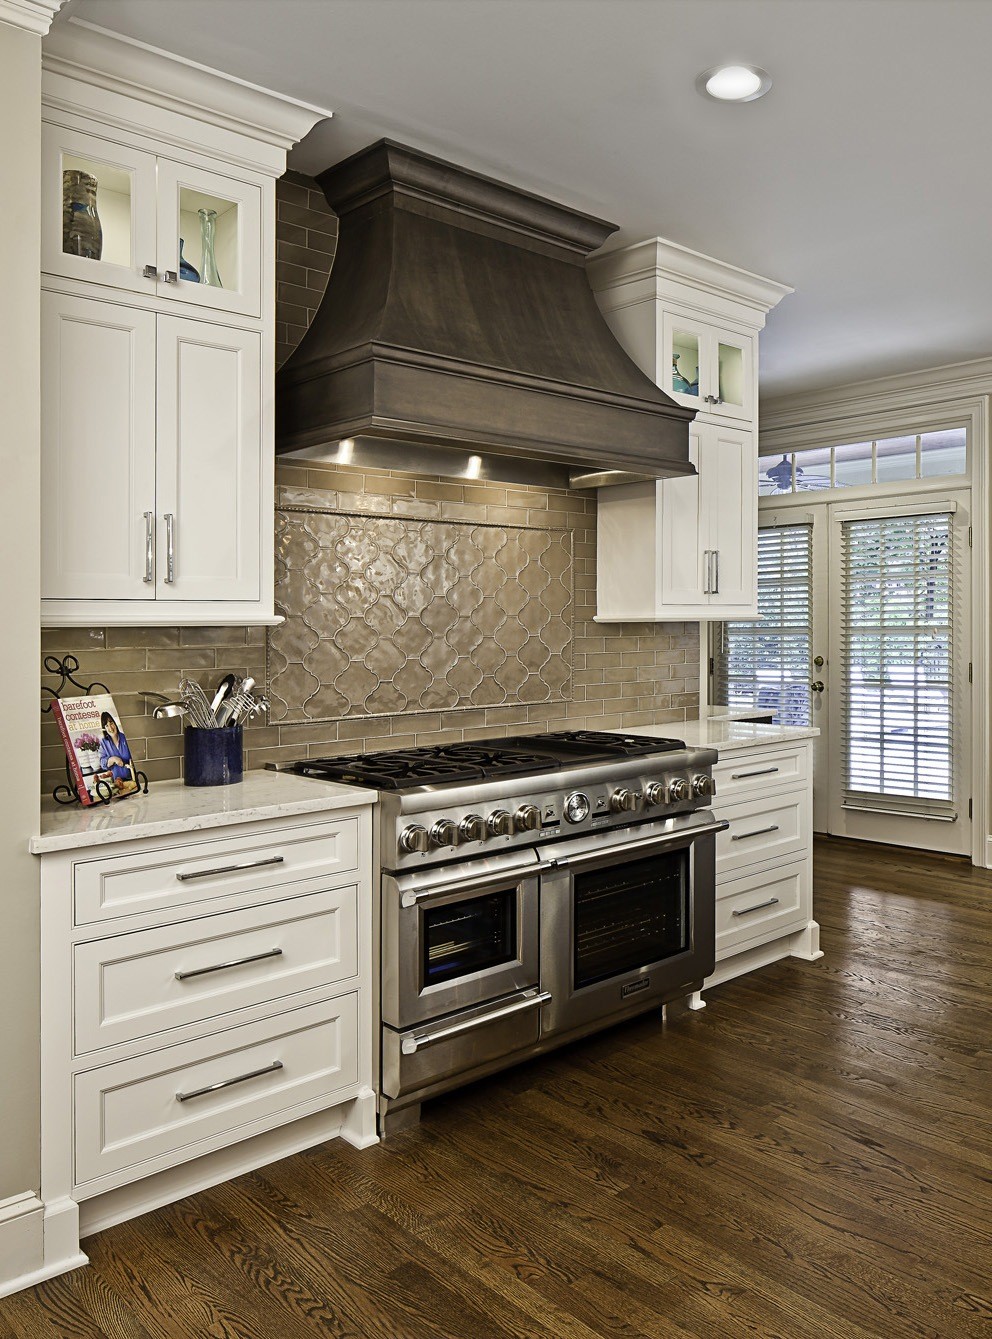 How to Choose Kitchen Cabinets | Case Charlotte